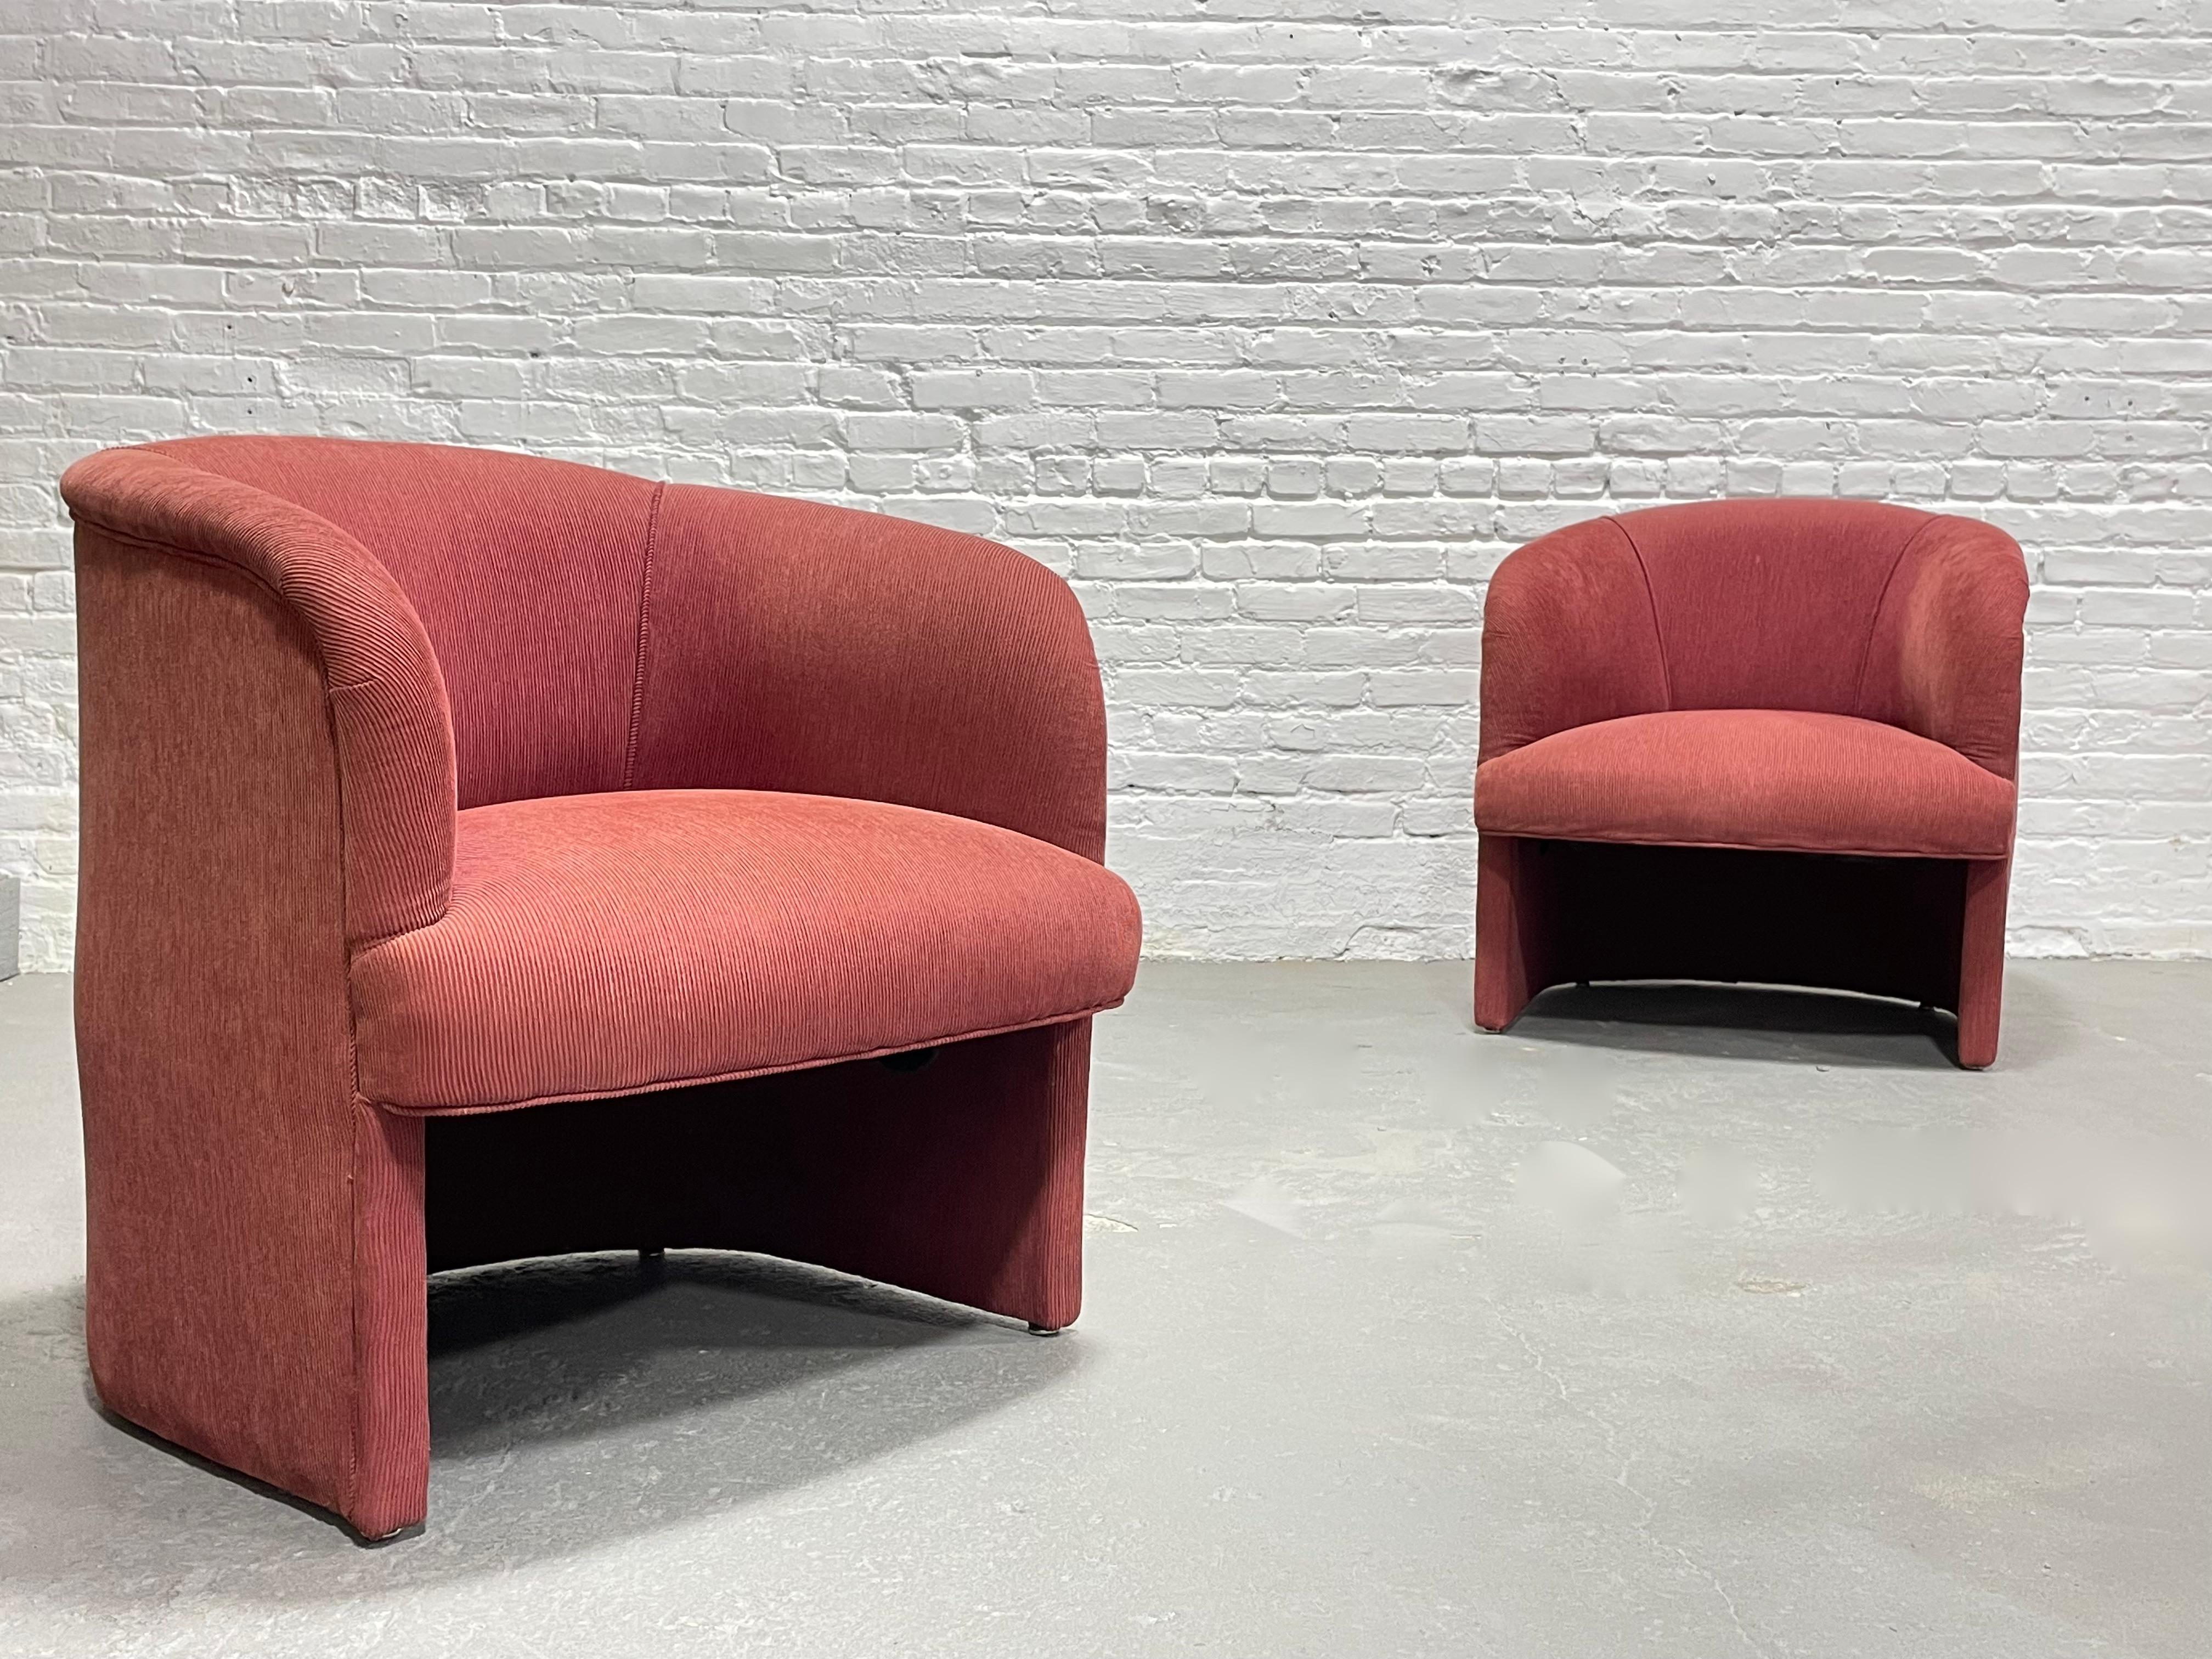 Late 20th Century Postmodern Lounge Chairs / Armchairs, a Pair For Sale